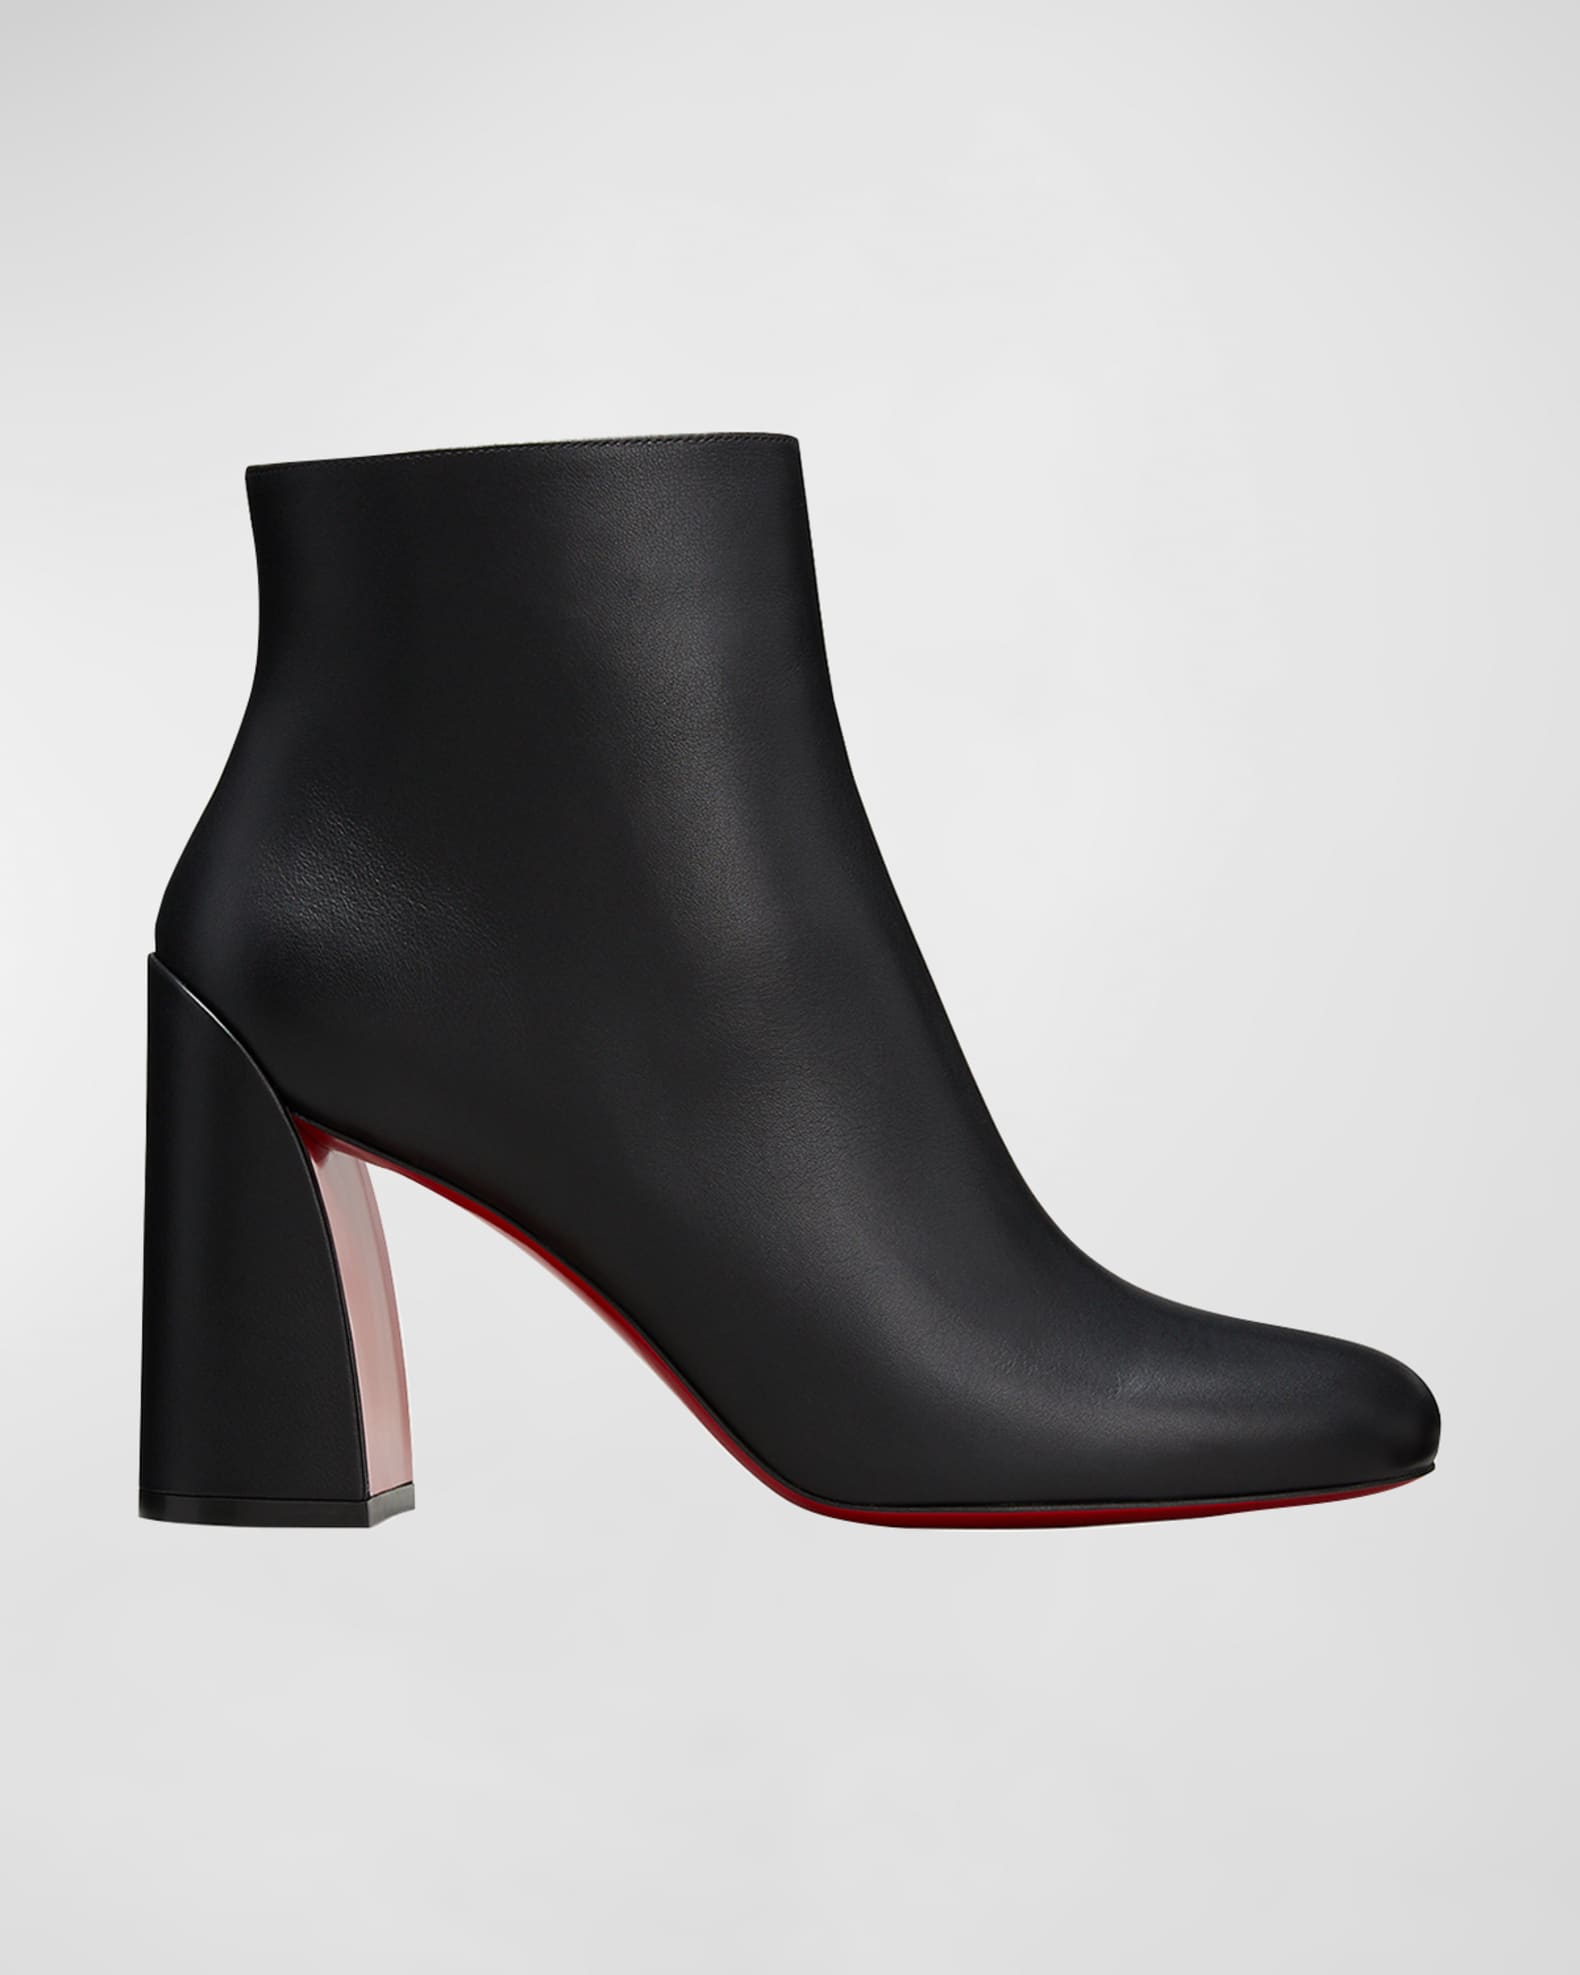 Christian Louboutin Turela Calfskin Red Sole Ankle Booties | Neiman Marcus